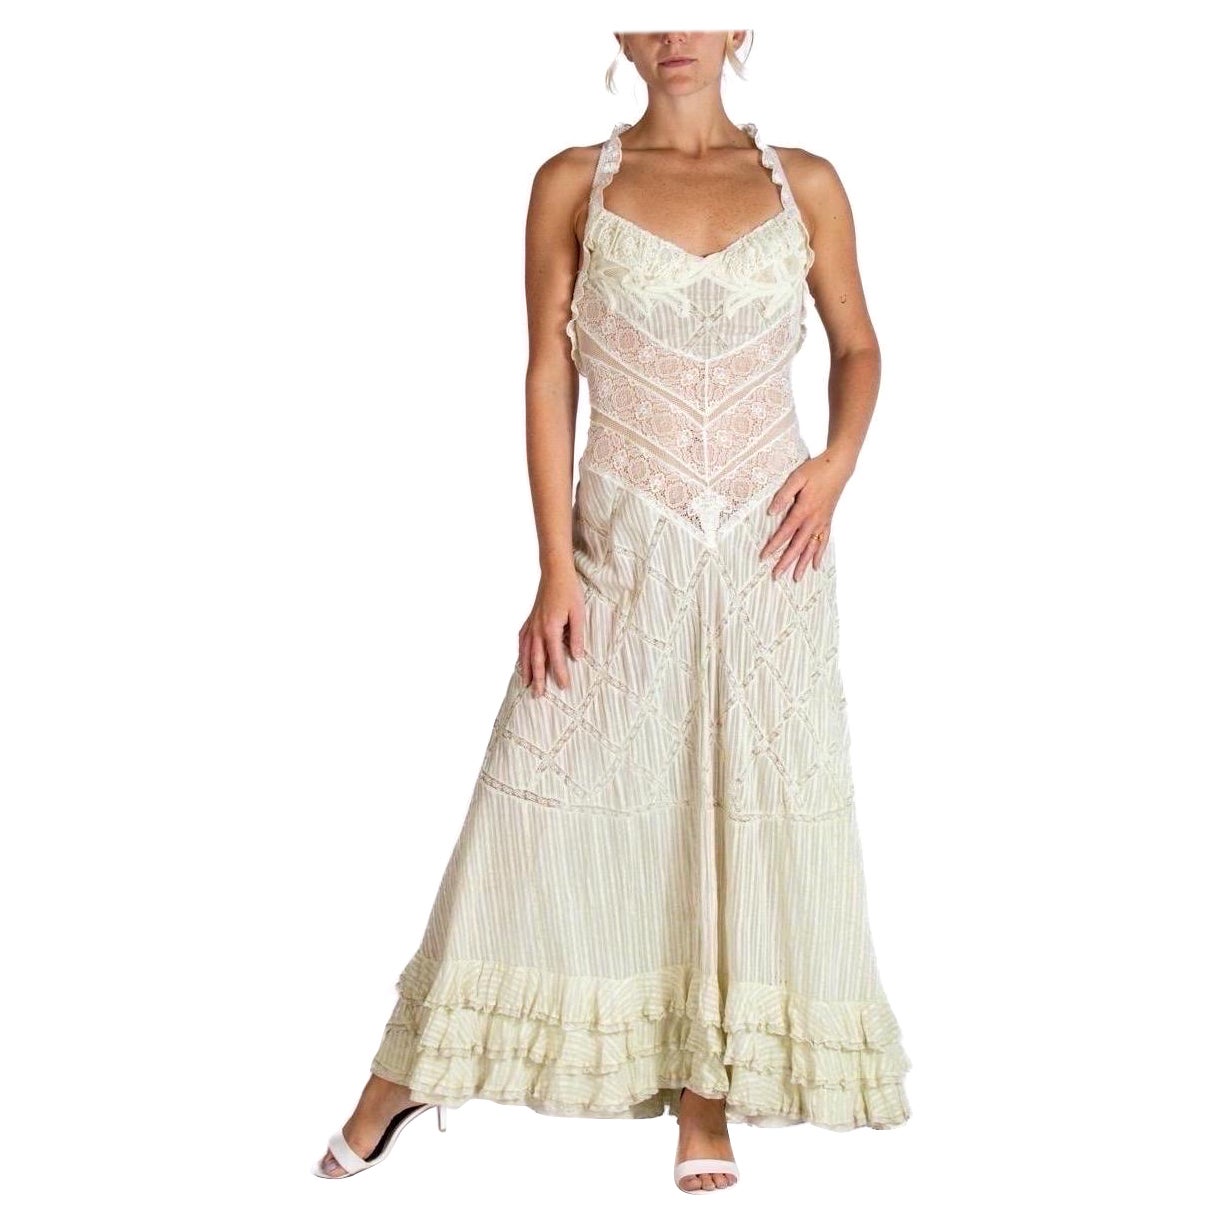 MORPHEW ATELIER Butter Cream With Victorian Lace From Paris Gown For Sale